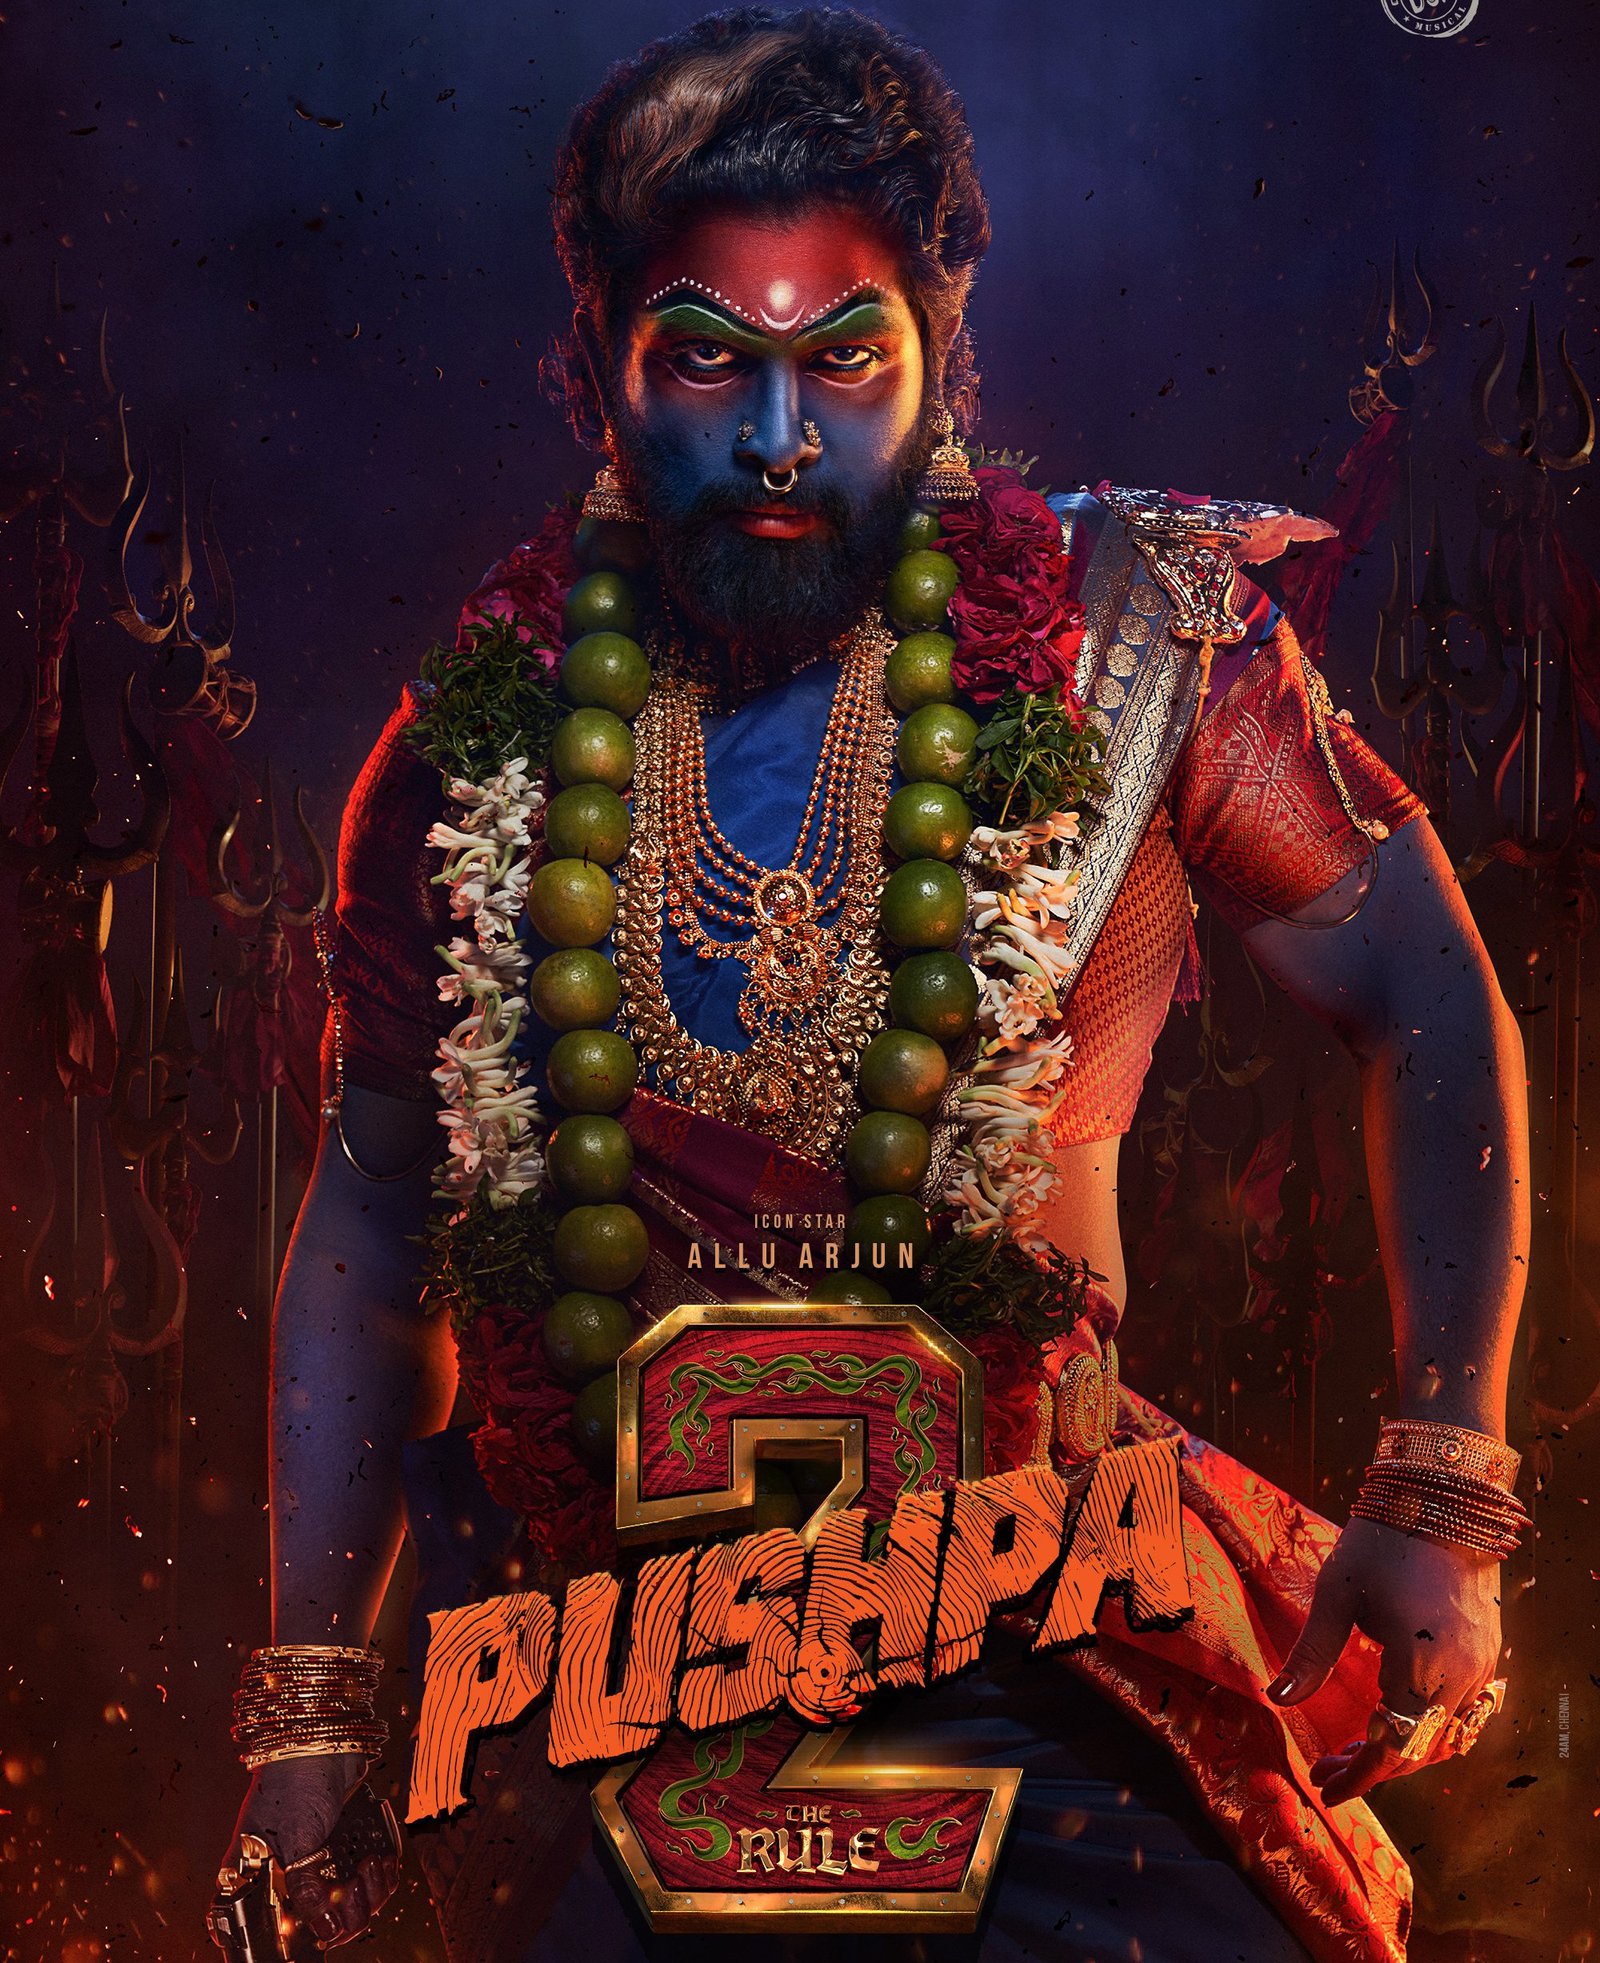 Pushpa The Rule | Soon the makers of the film will unveil the teaser of the film.